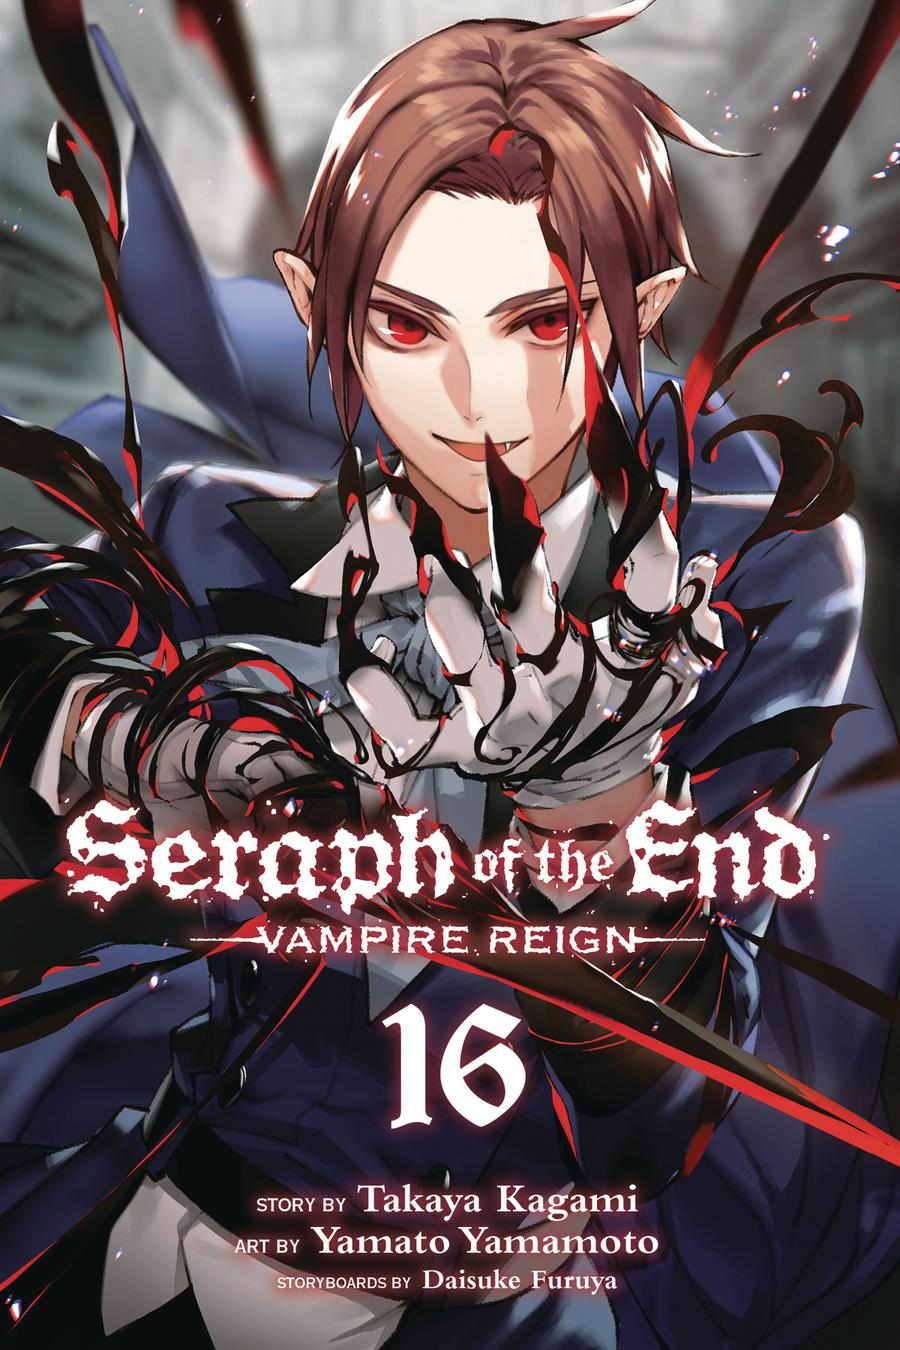 Seraph Of The End Vampire Reign Vol 16 TP